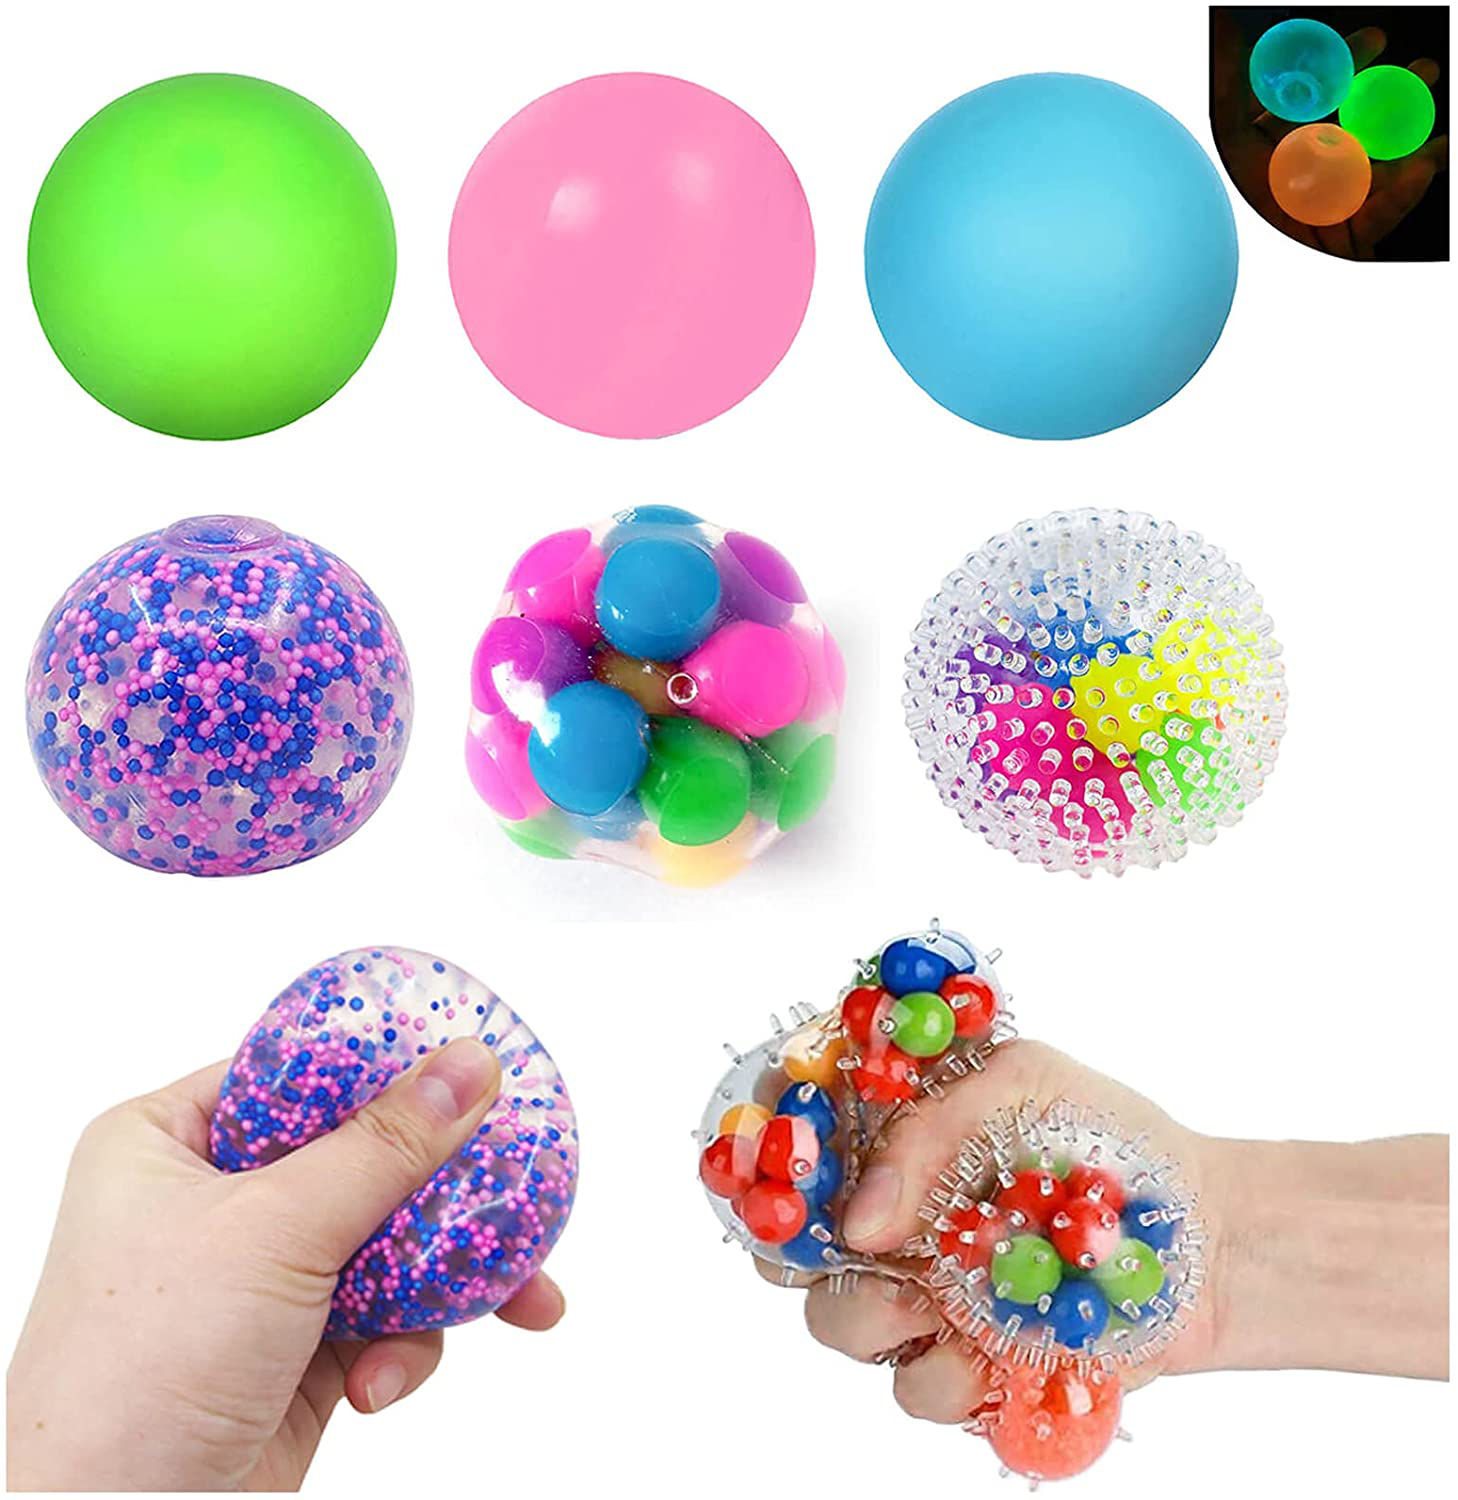 3x Squishy Sensory Stress Reliever Ball Toy Autism Squeeze Anxiety Fidget Balls 